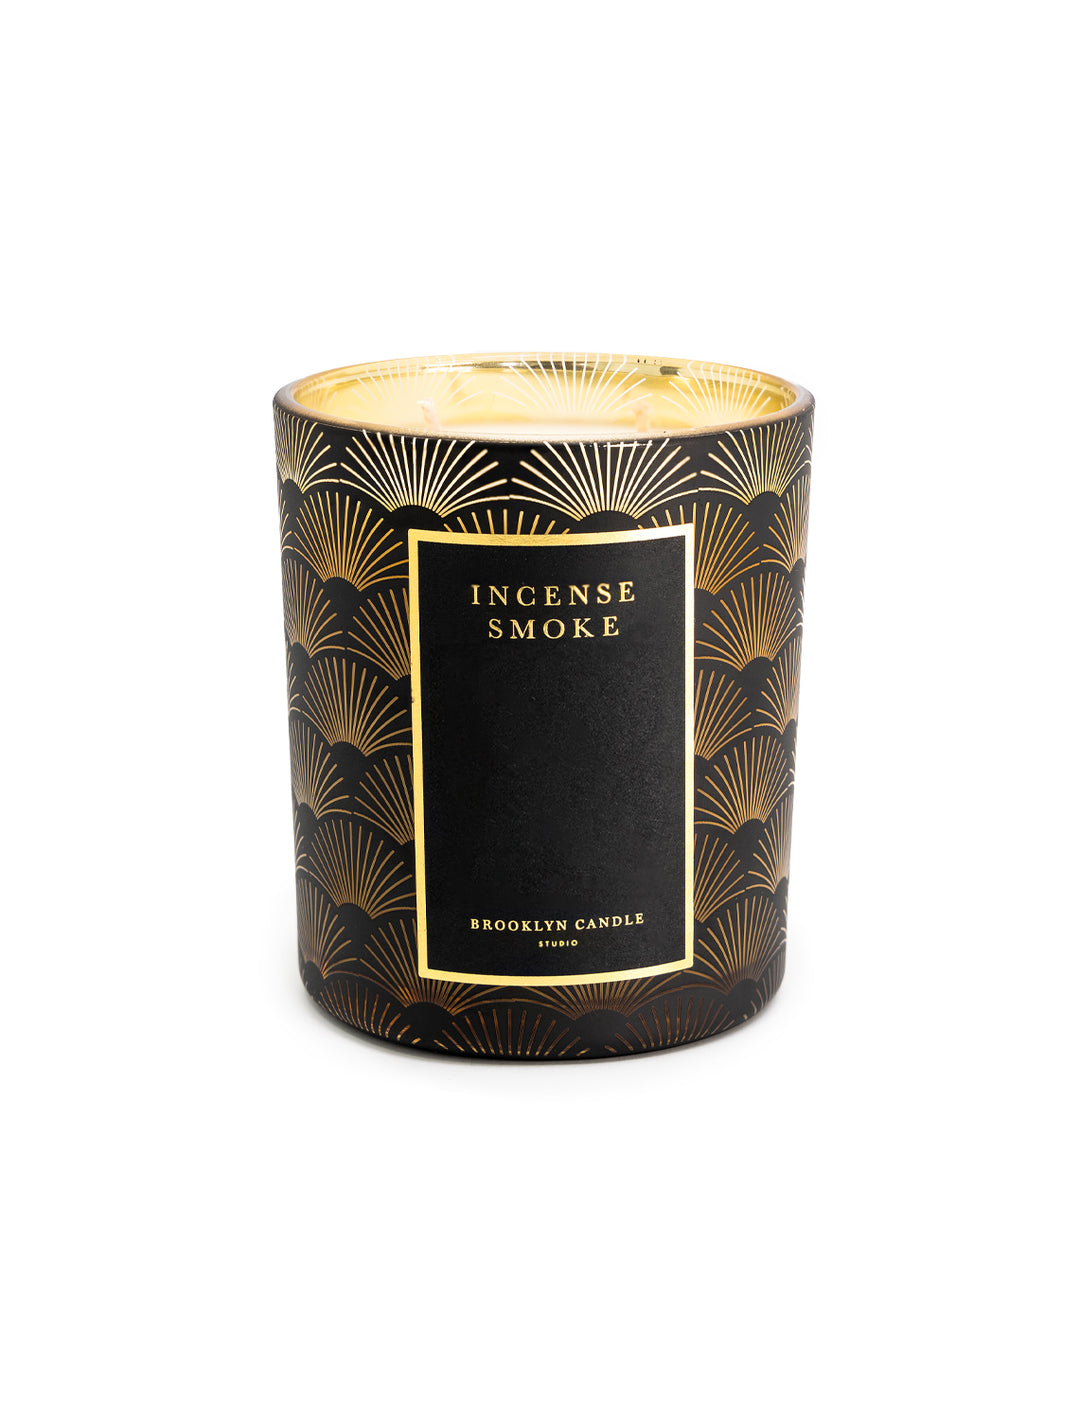 Front view of Brooklyn Candle Studio's incense smoke black tie holiday candle.